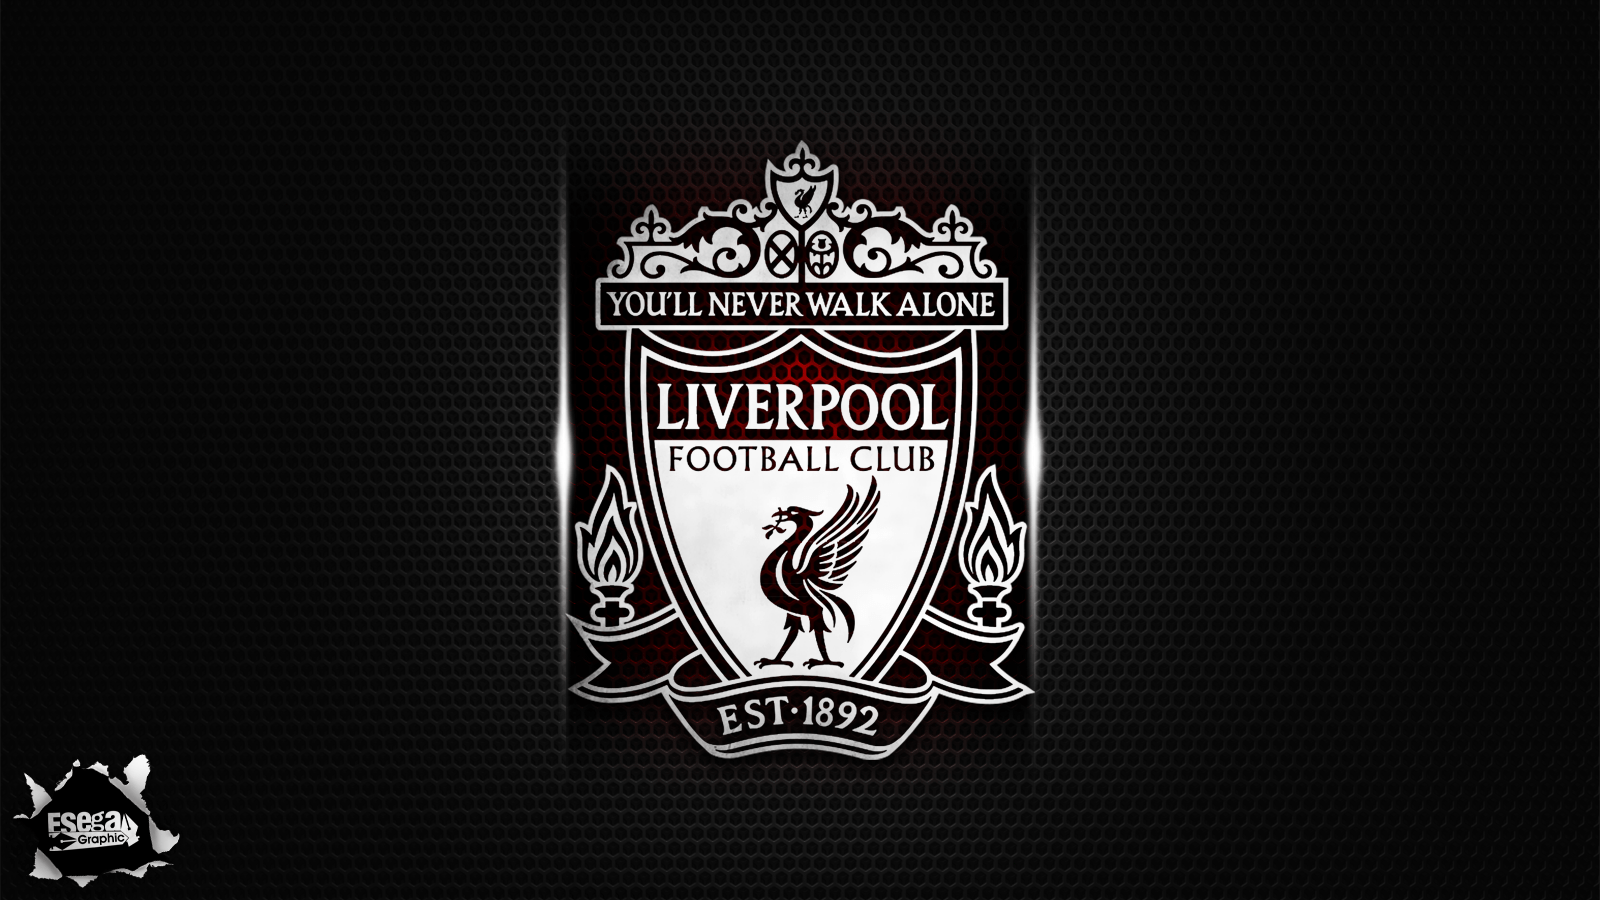 Download Liverpool FC Wallpaper For Mac collection of only the best